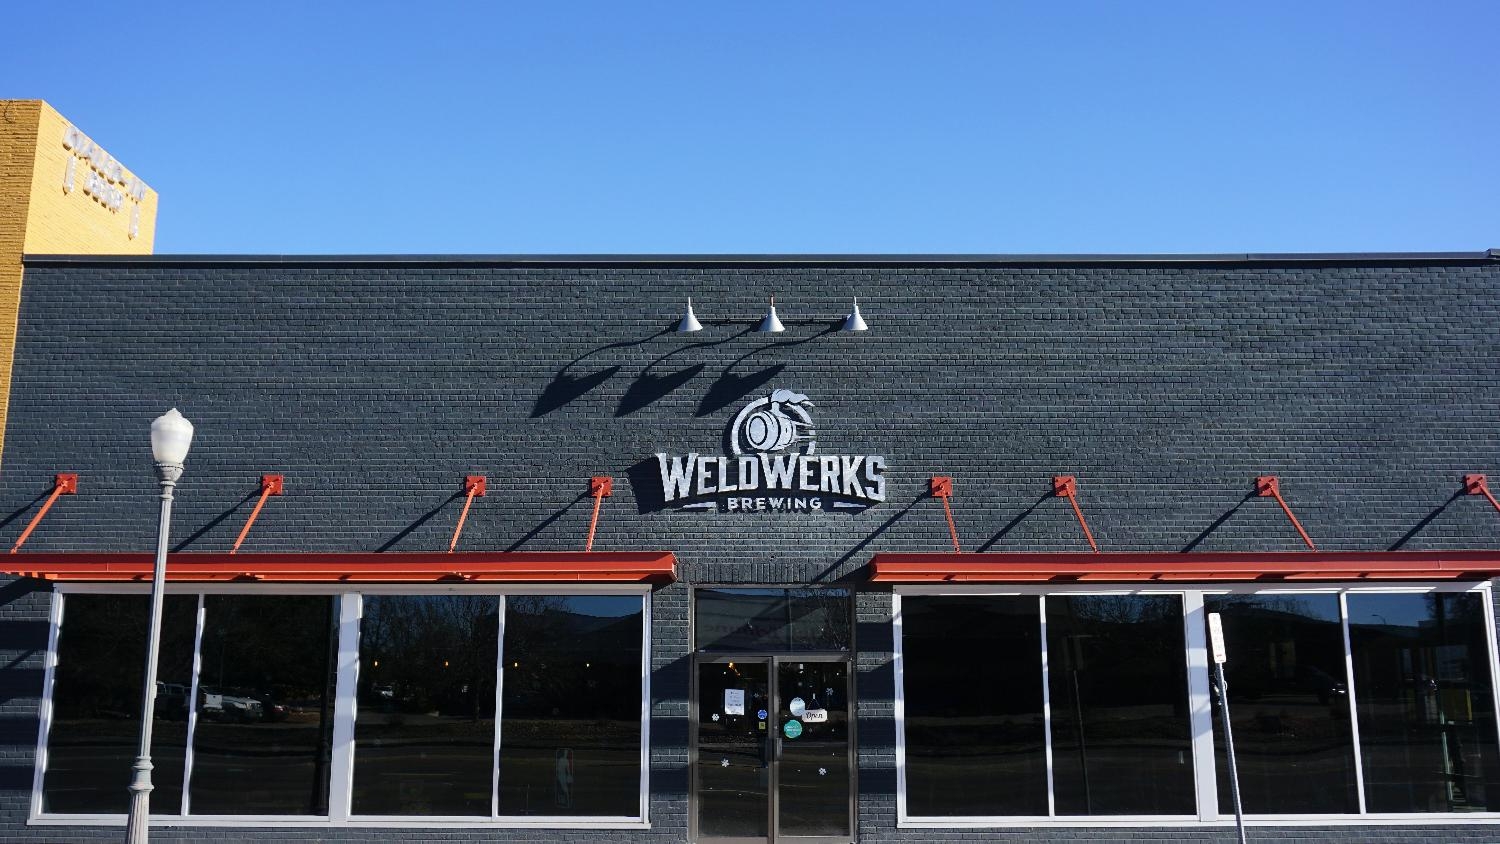 An exterior view of the WeldWerks taproom and production facility.